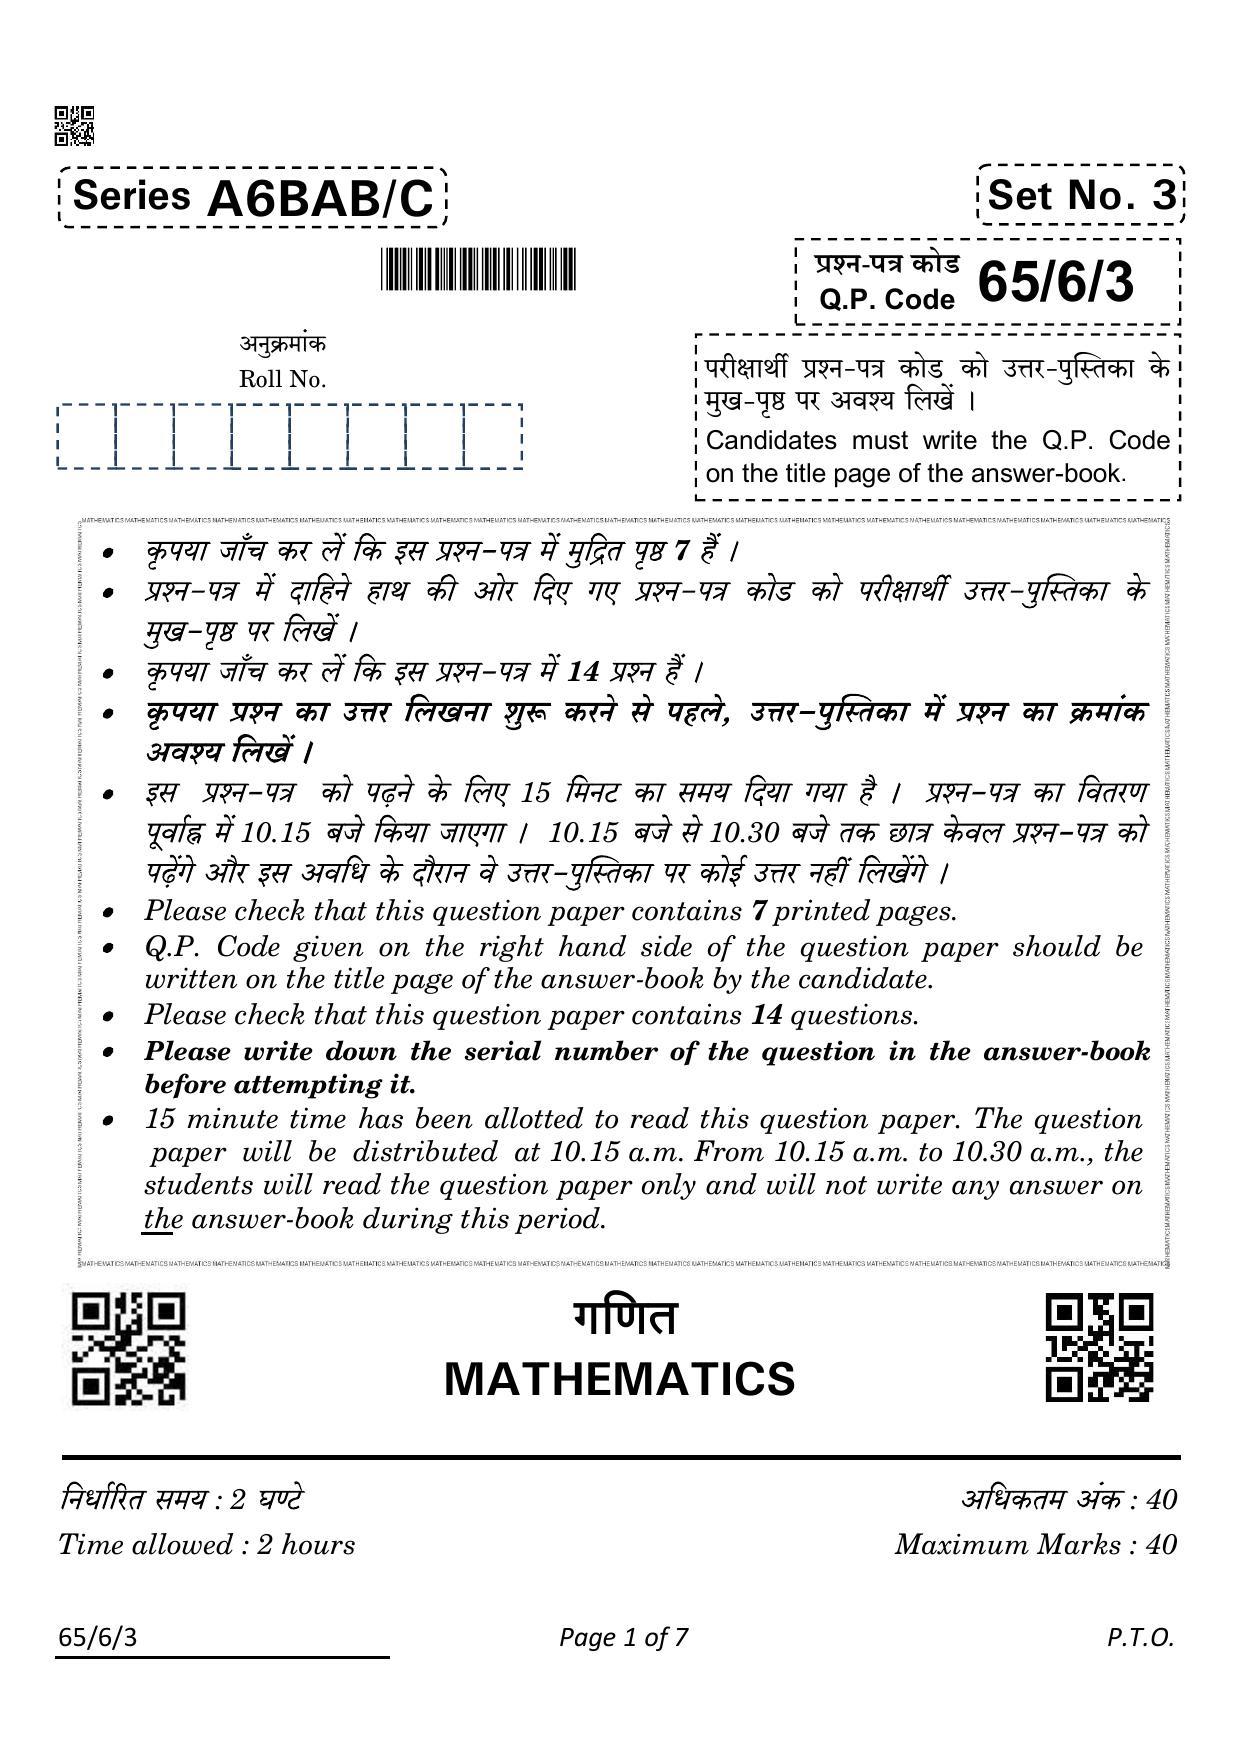 CBSE Class 12 65-6-3 Maths 2022 Compartment Question Paper - Page 1